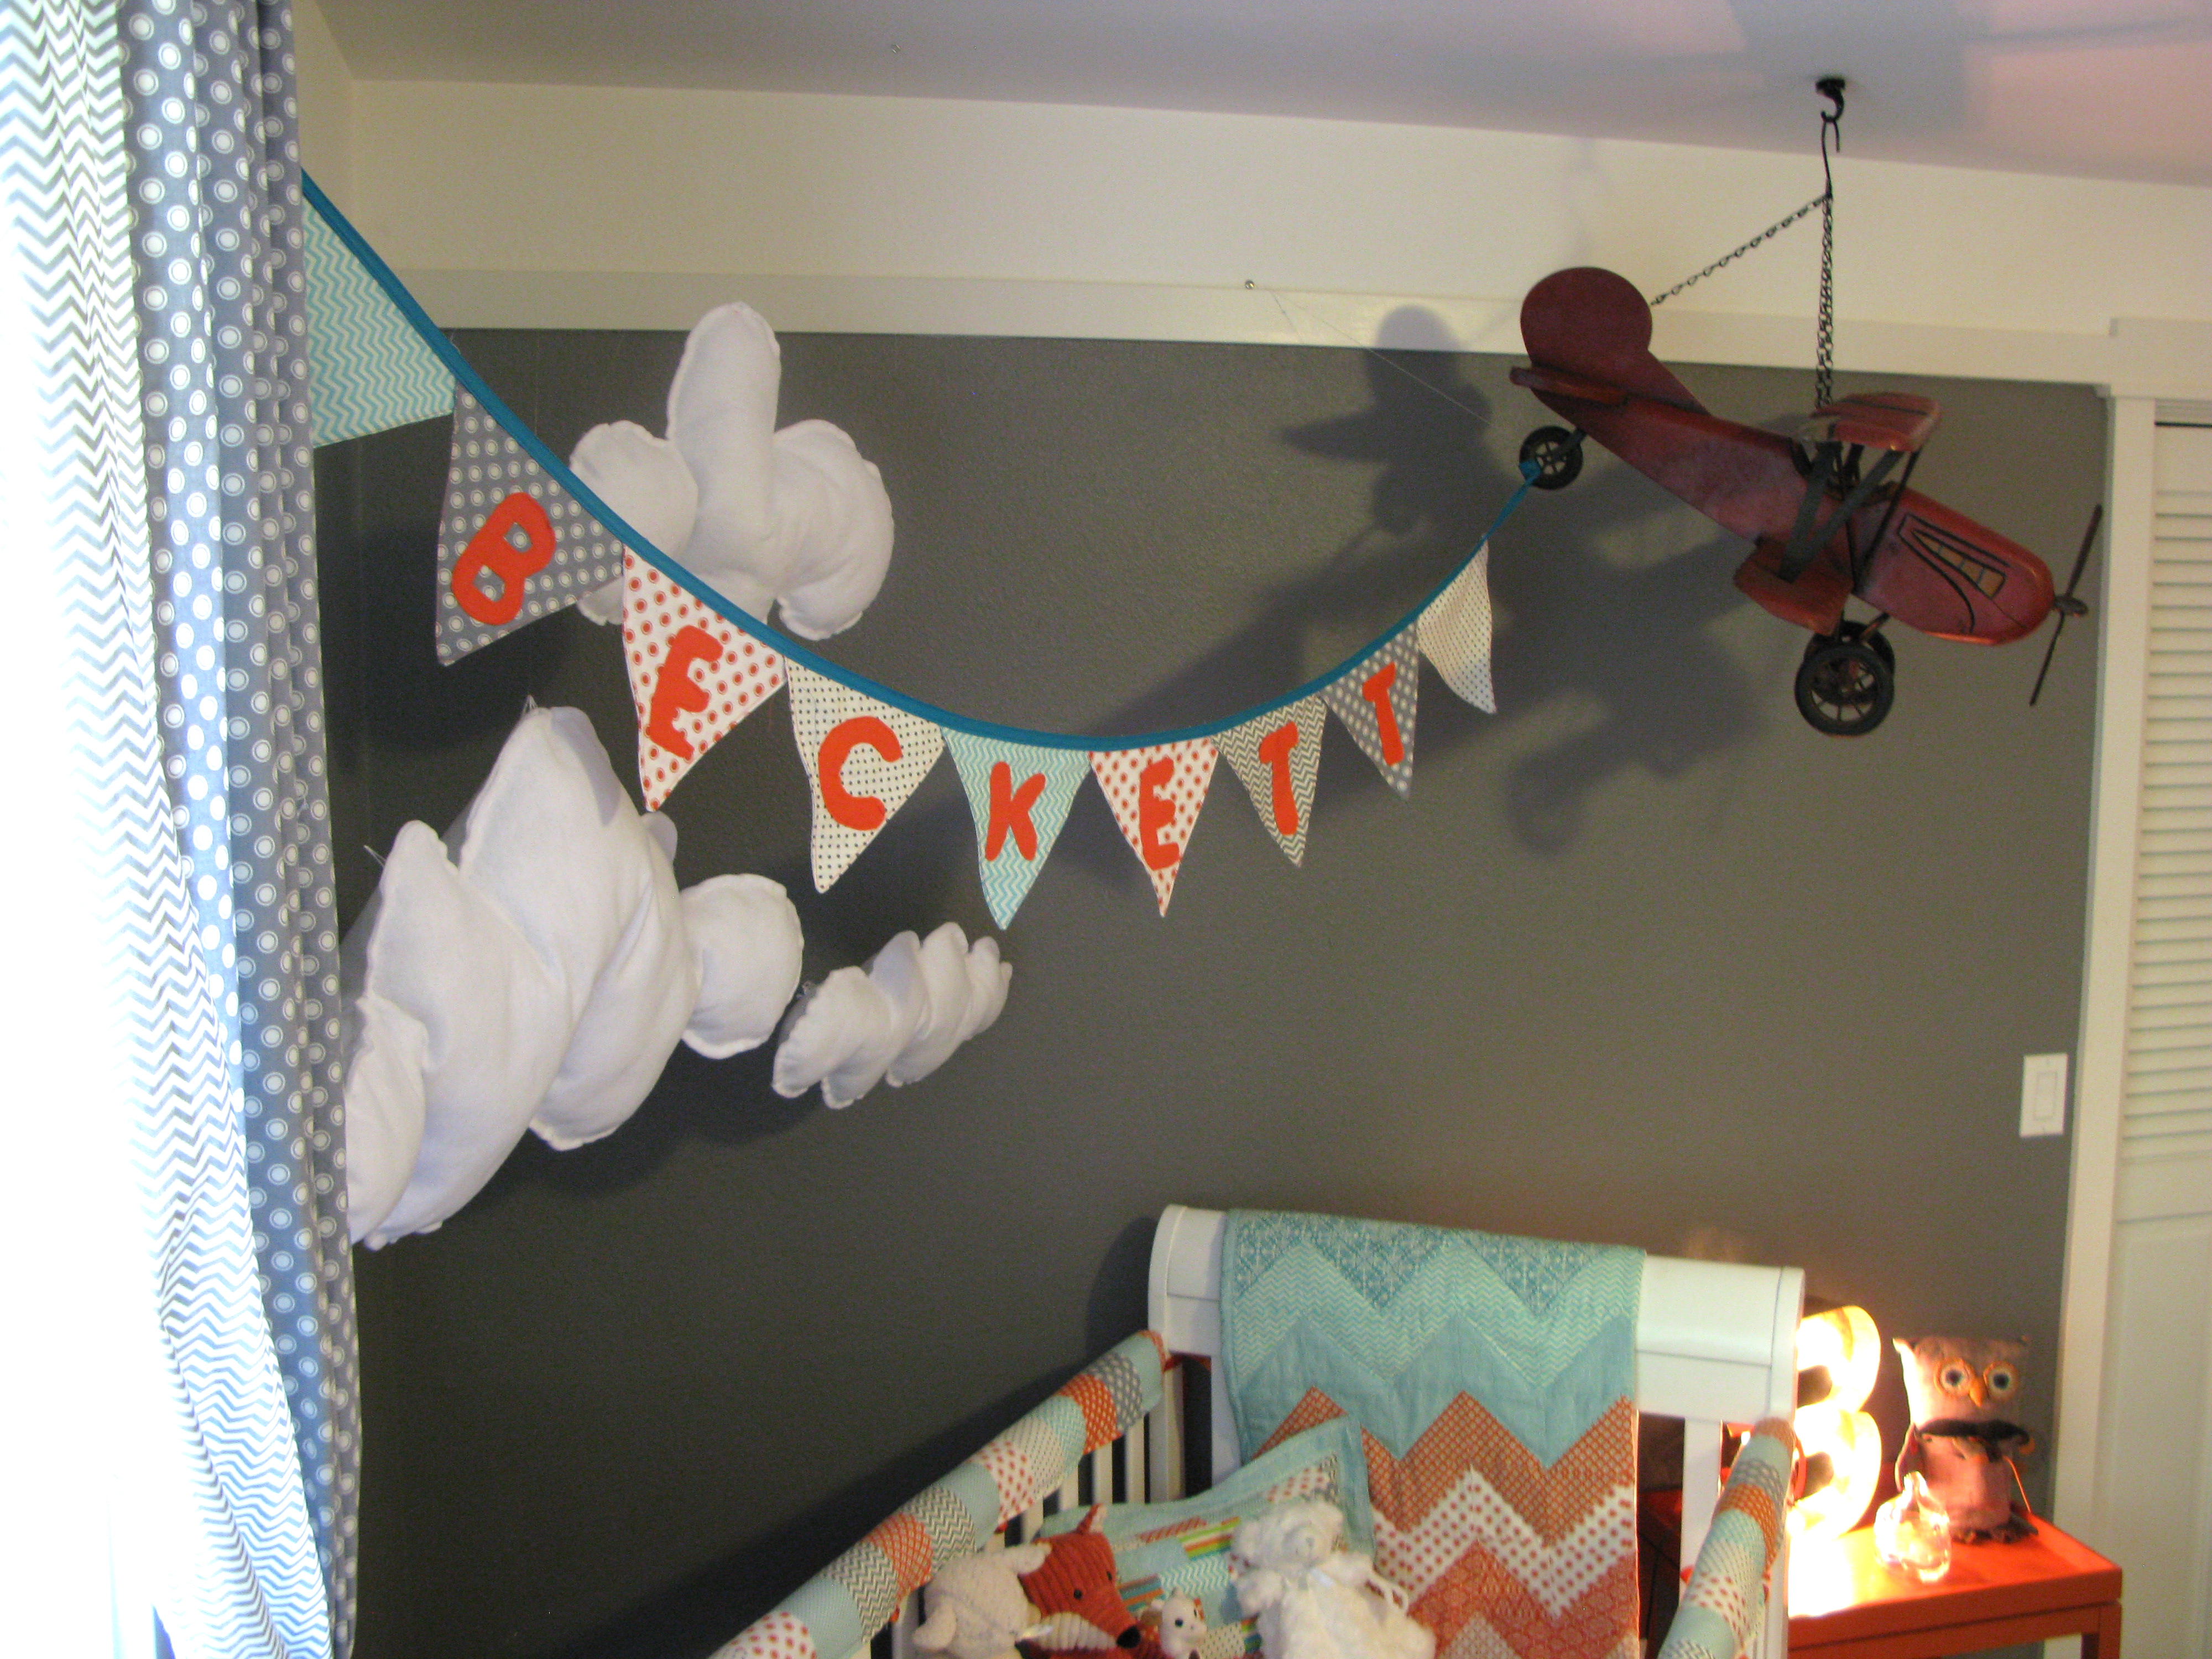 Personalized Banner With Clouds and Airplane Over Crib